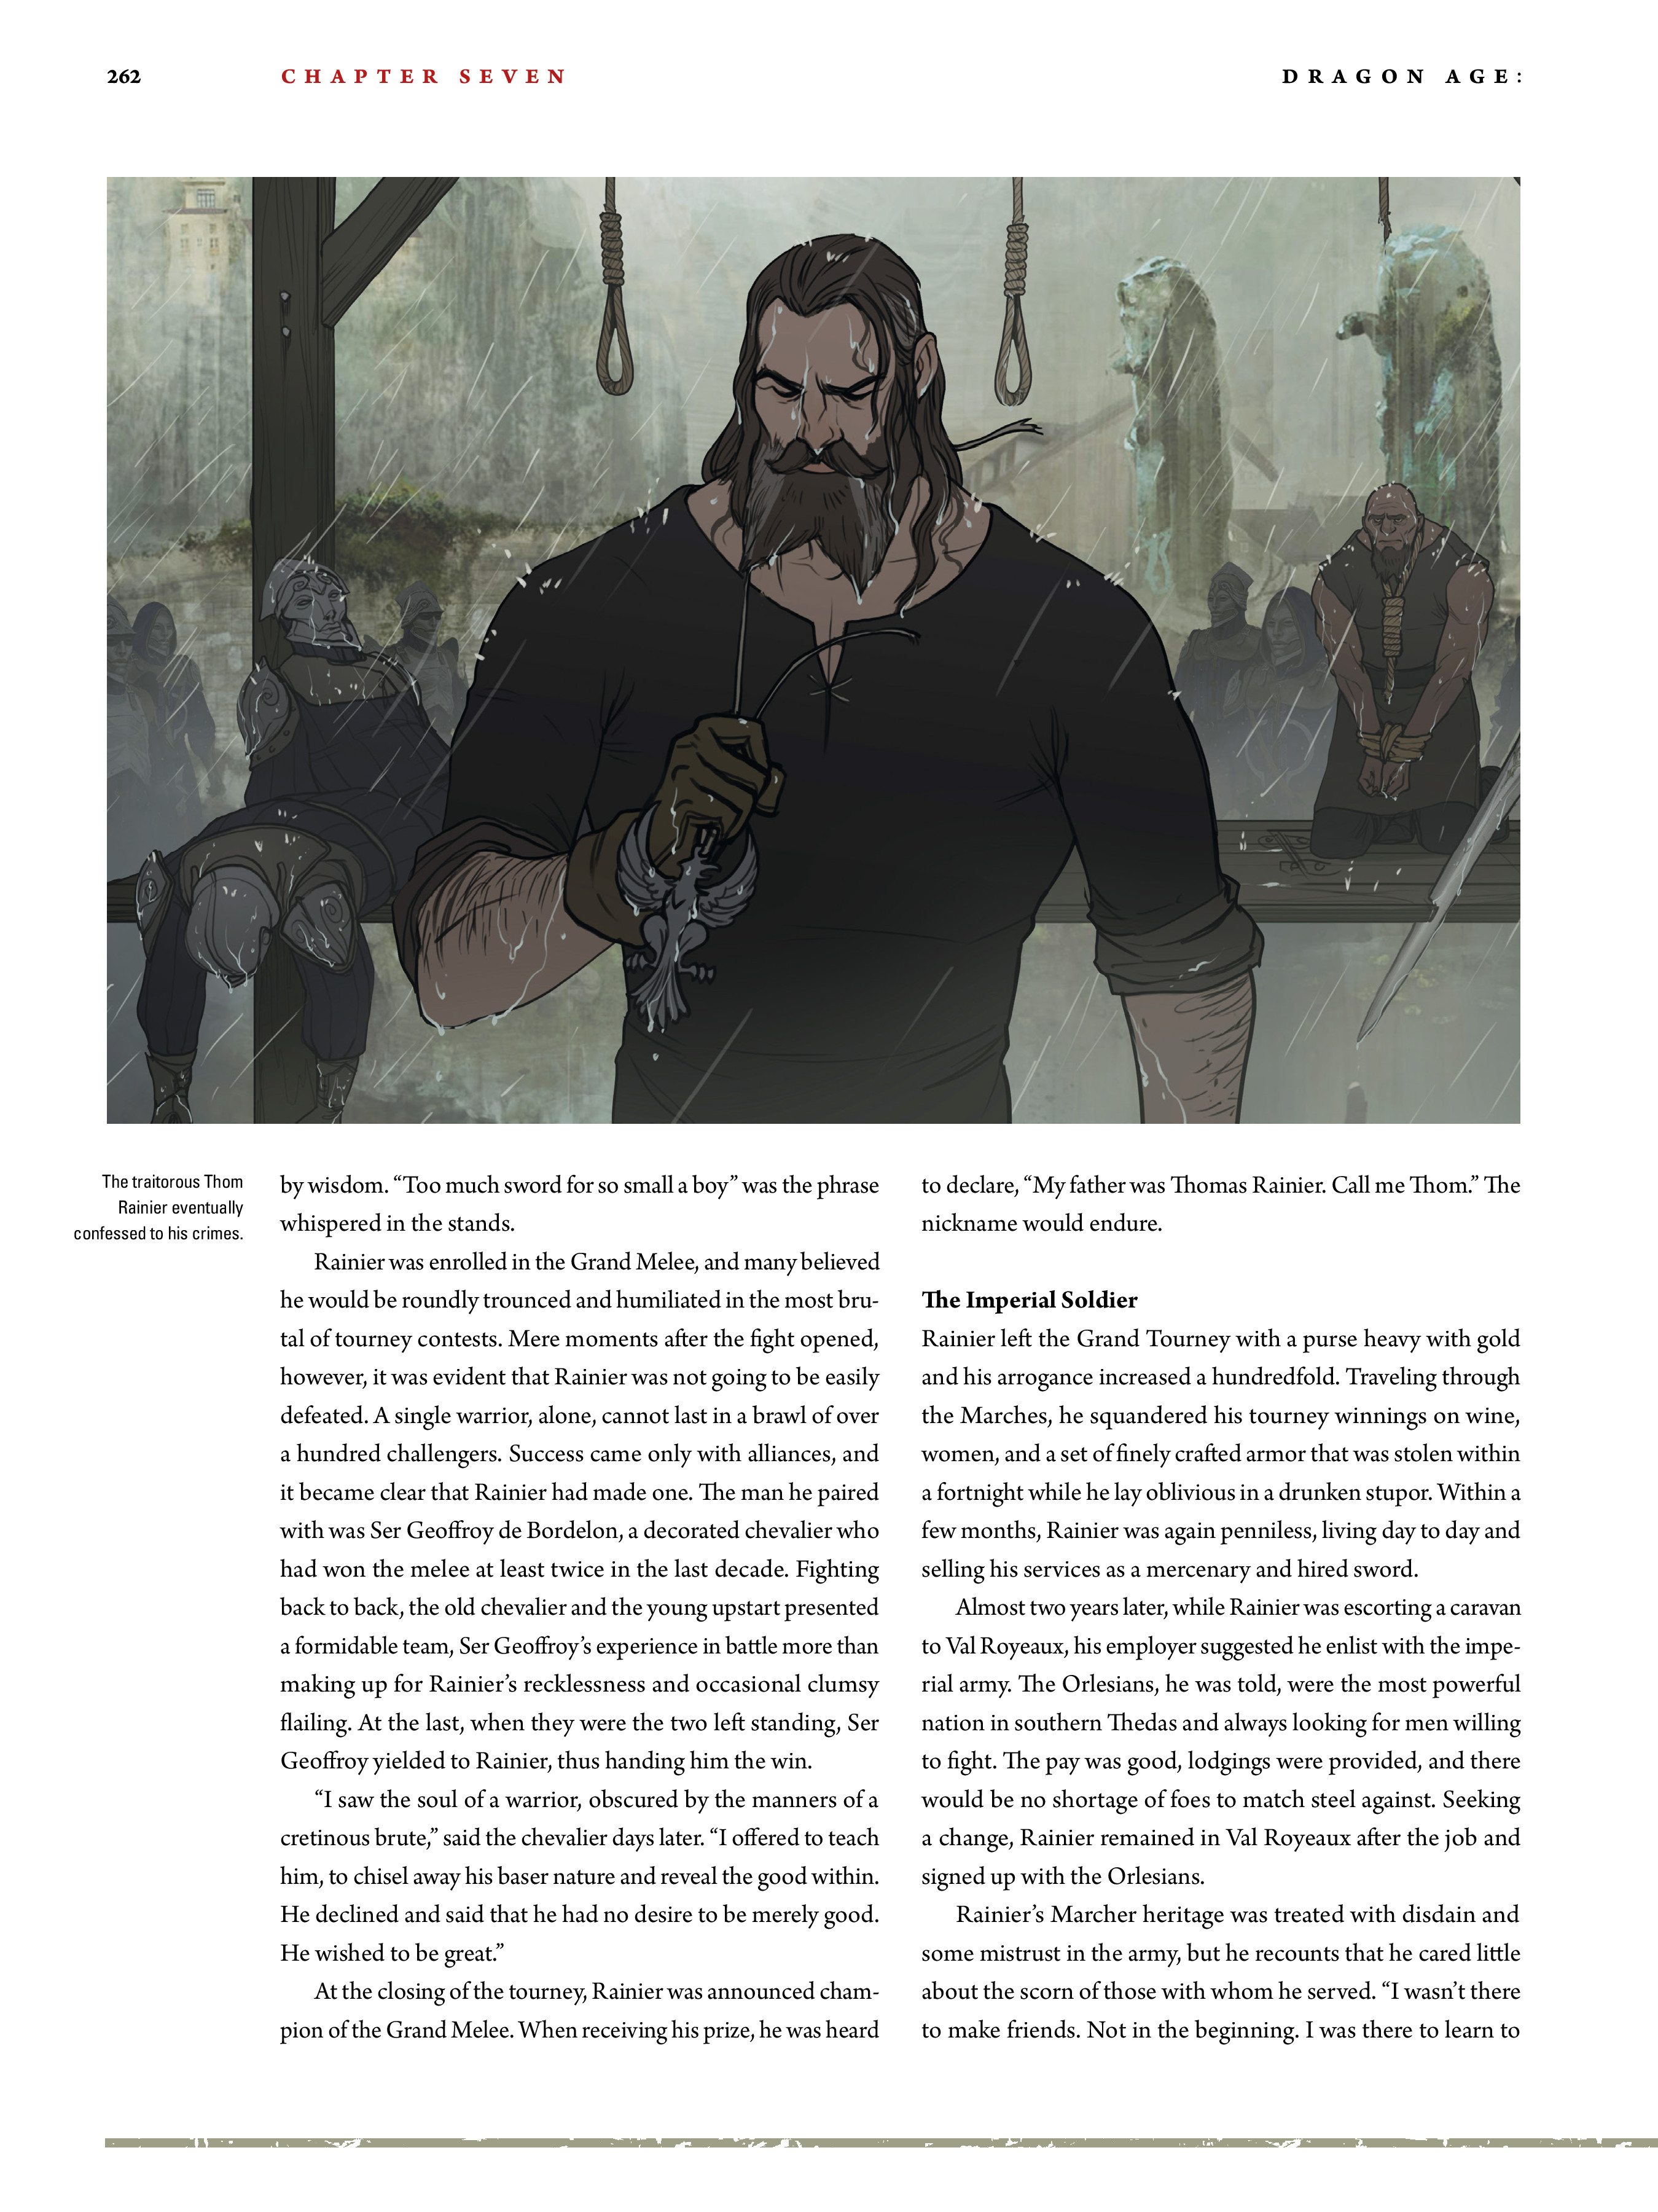 Read online Dragon Age: The World of Thedas comic -  Issue # TPB 2 - 255